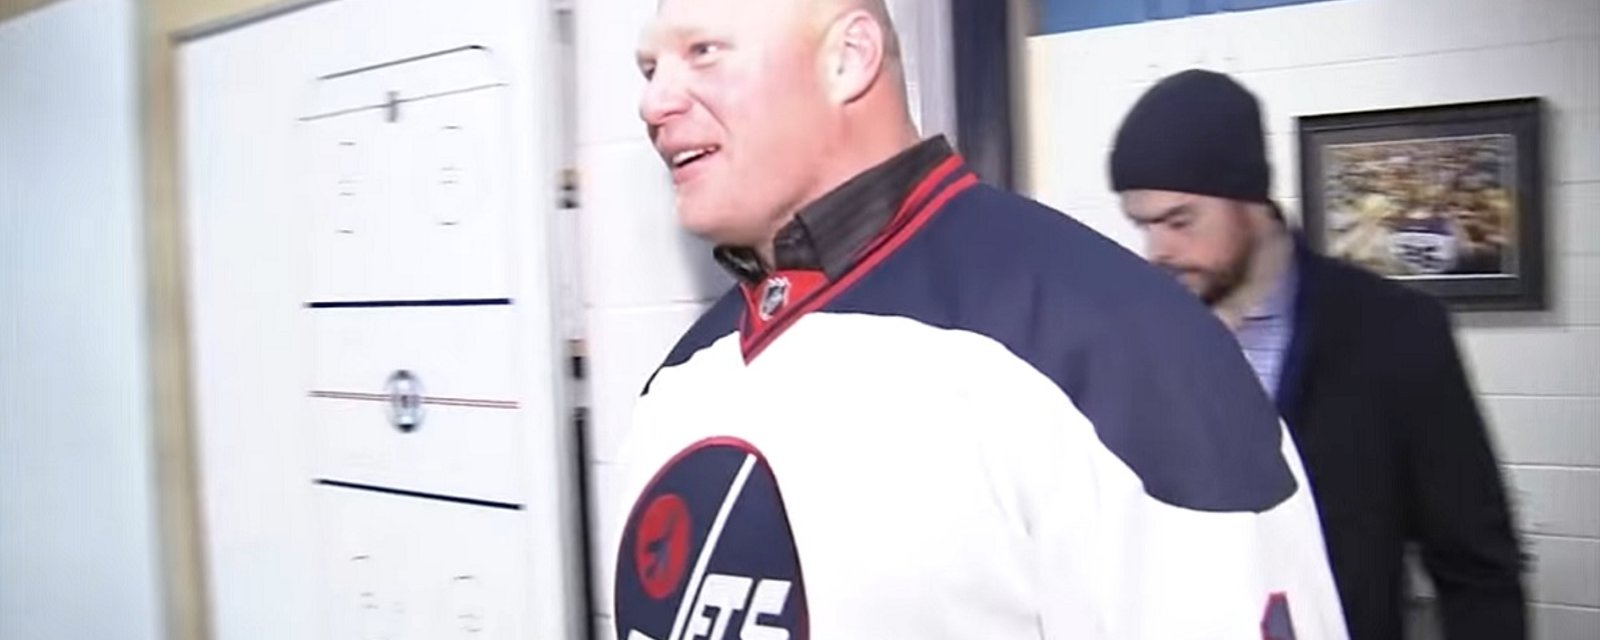 Jets players freak out as Brock Lesnar violates sacred hockey rule.